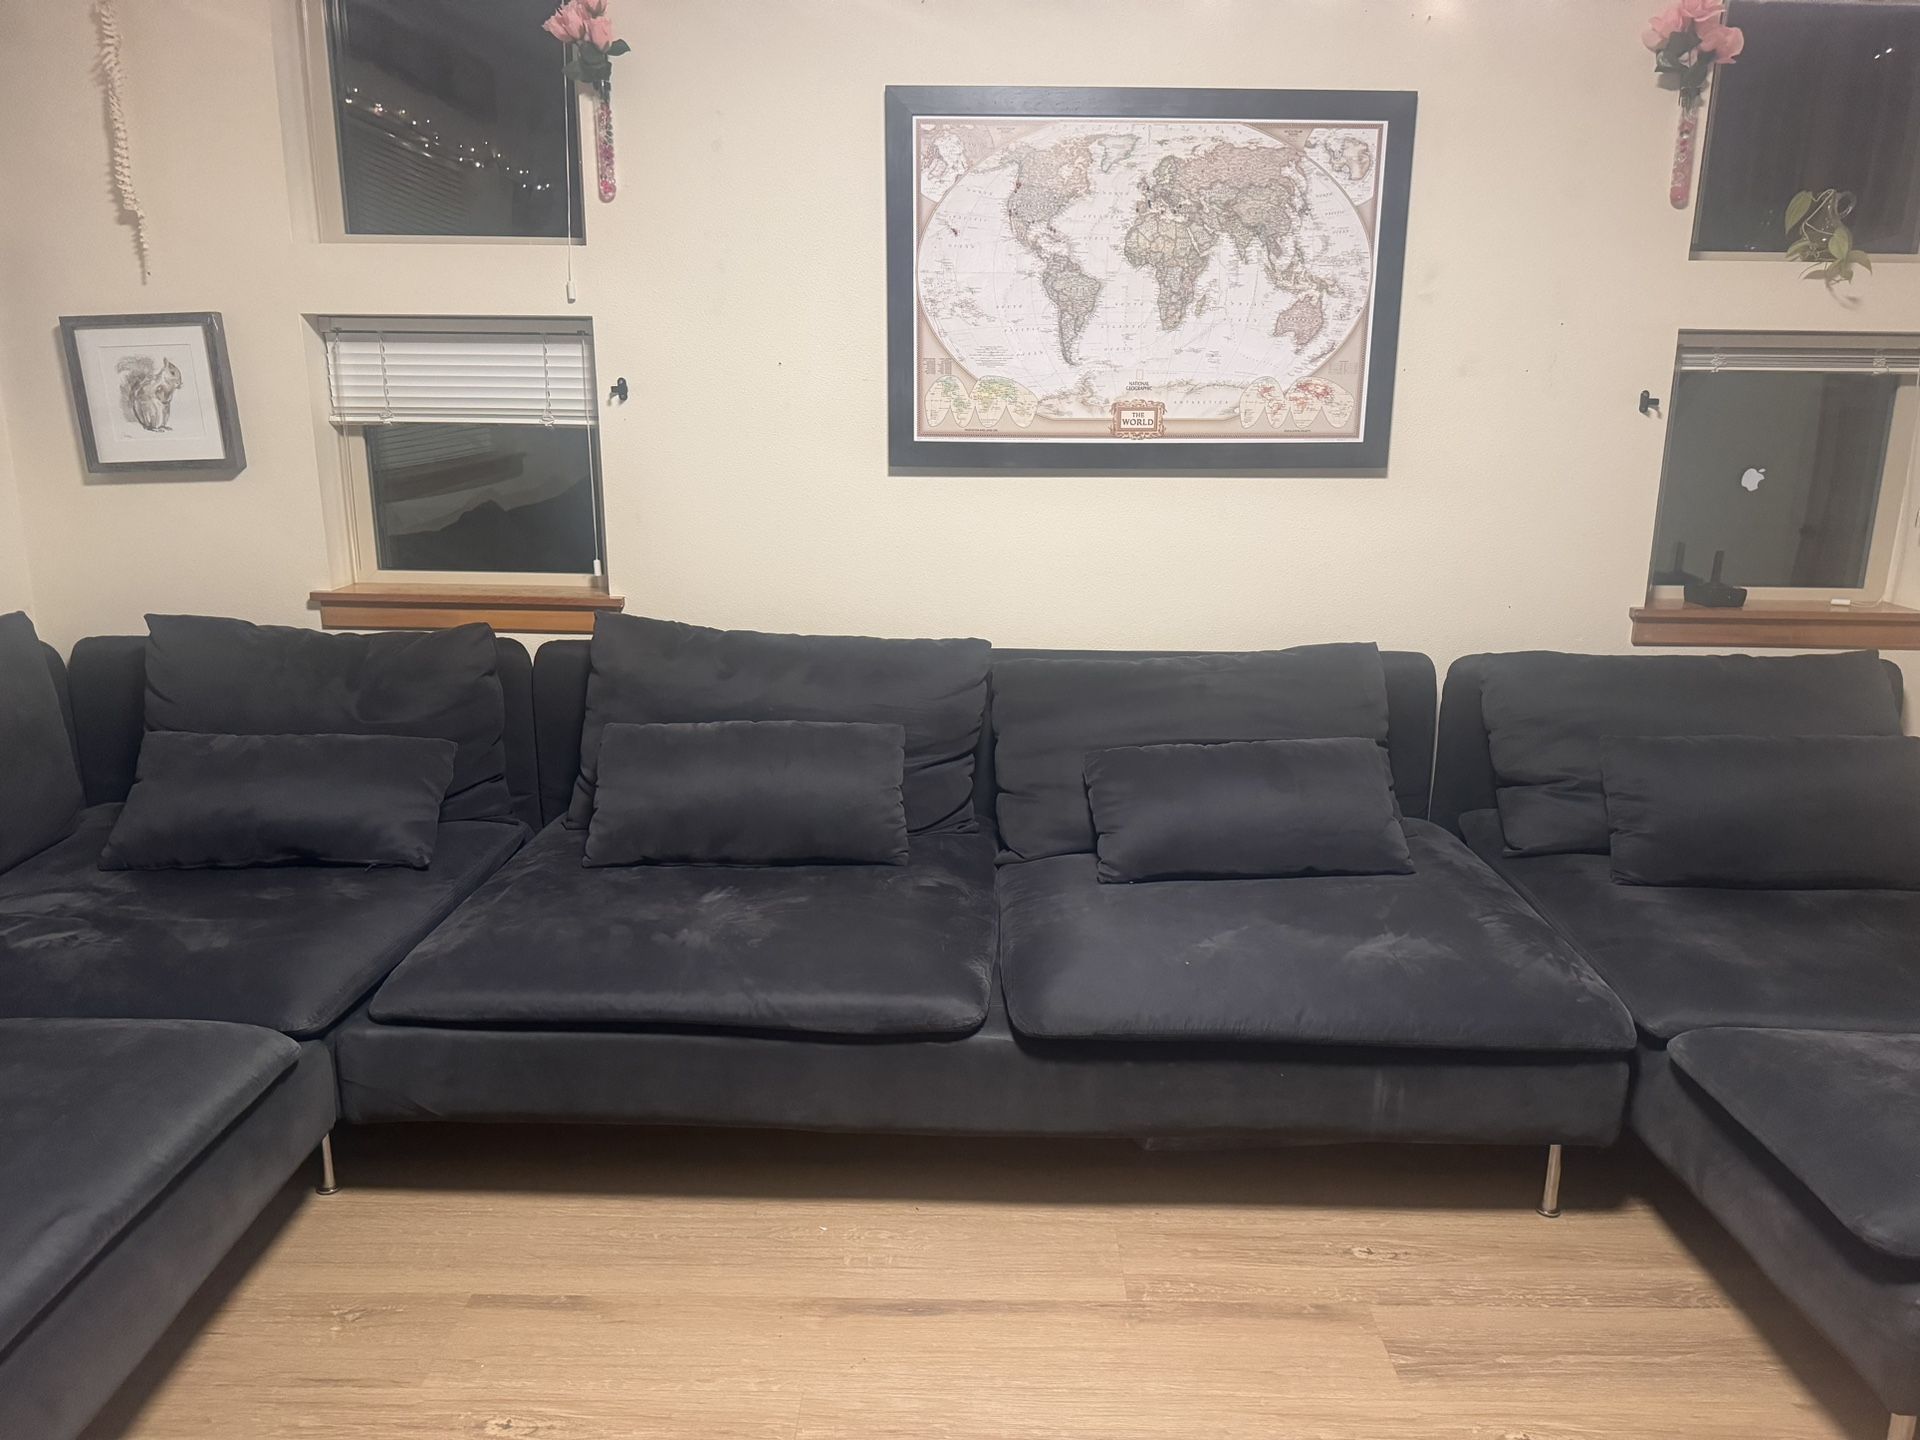 IKEA SODERHAMN SECTIONAL COUCH